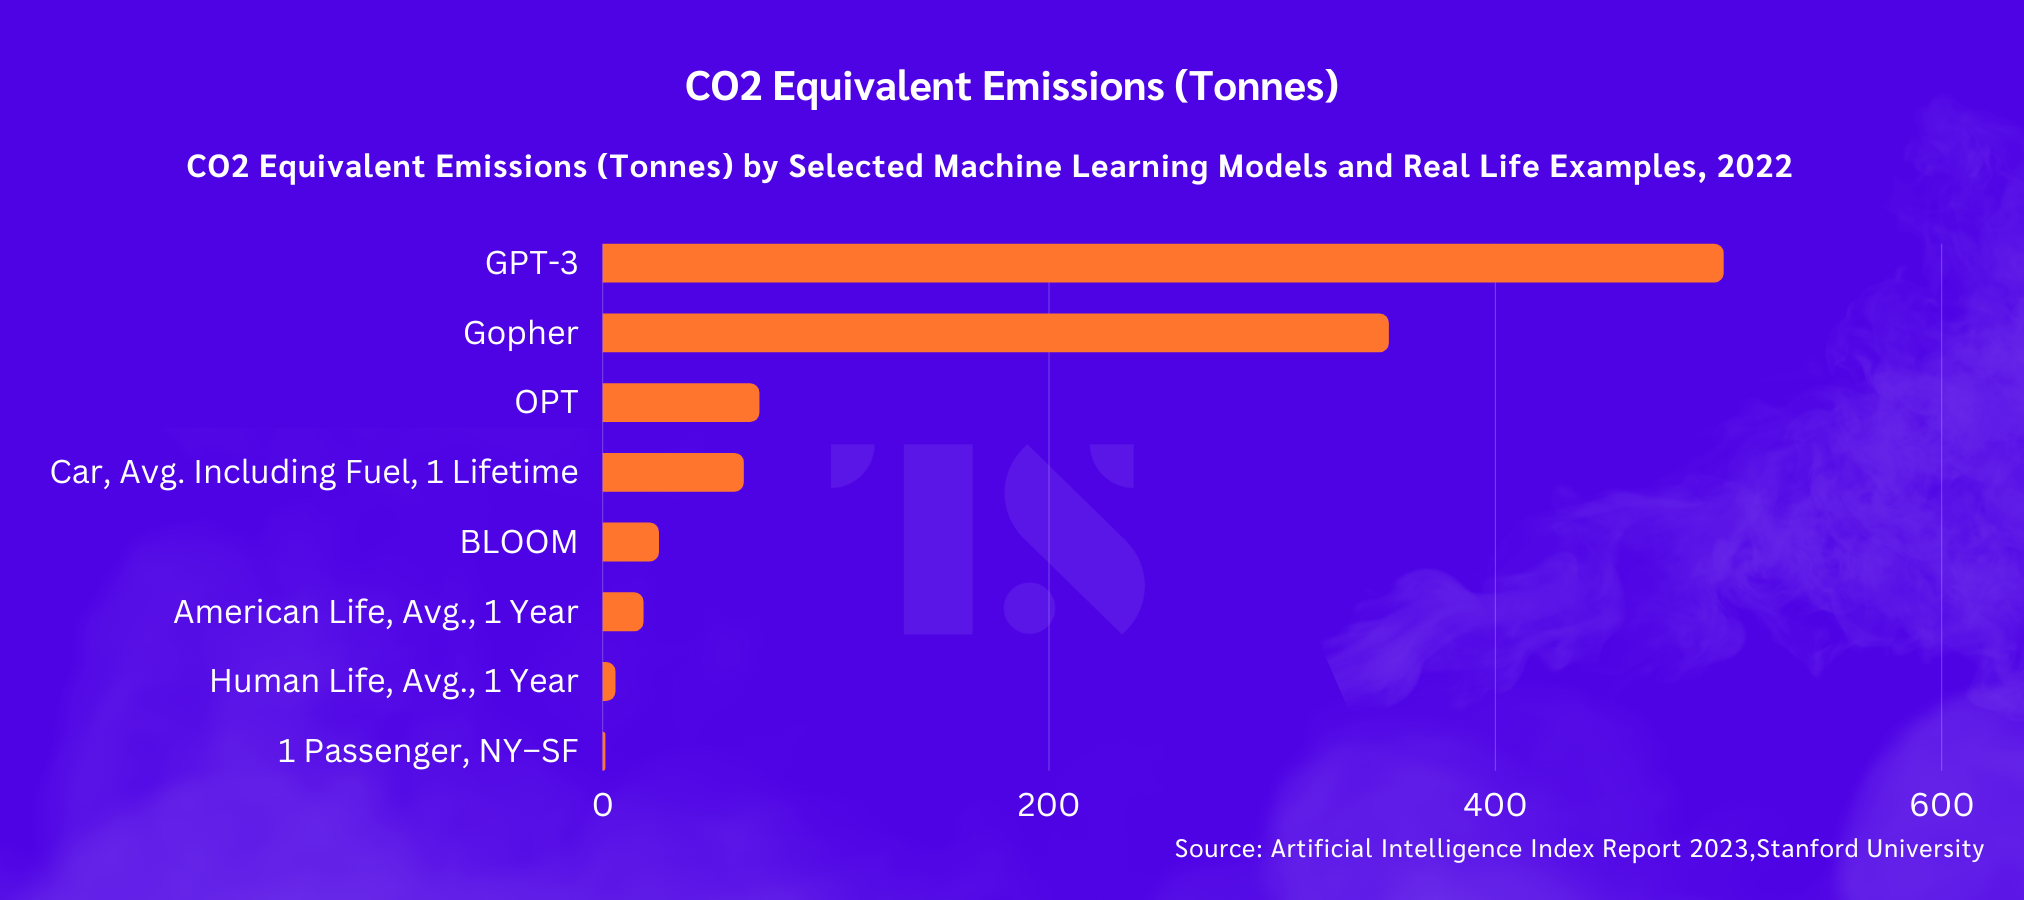 Horizontal bar chart showing that ChatGPT, Gopher and OPT- all LLM models emit alot more CO2 than those emitted by an american in an average year.  Chat-GPT emitted 502 tonnes of CO2 while an 18.8 tonnes is emitted within the span of an average human life. 